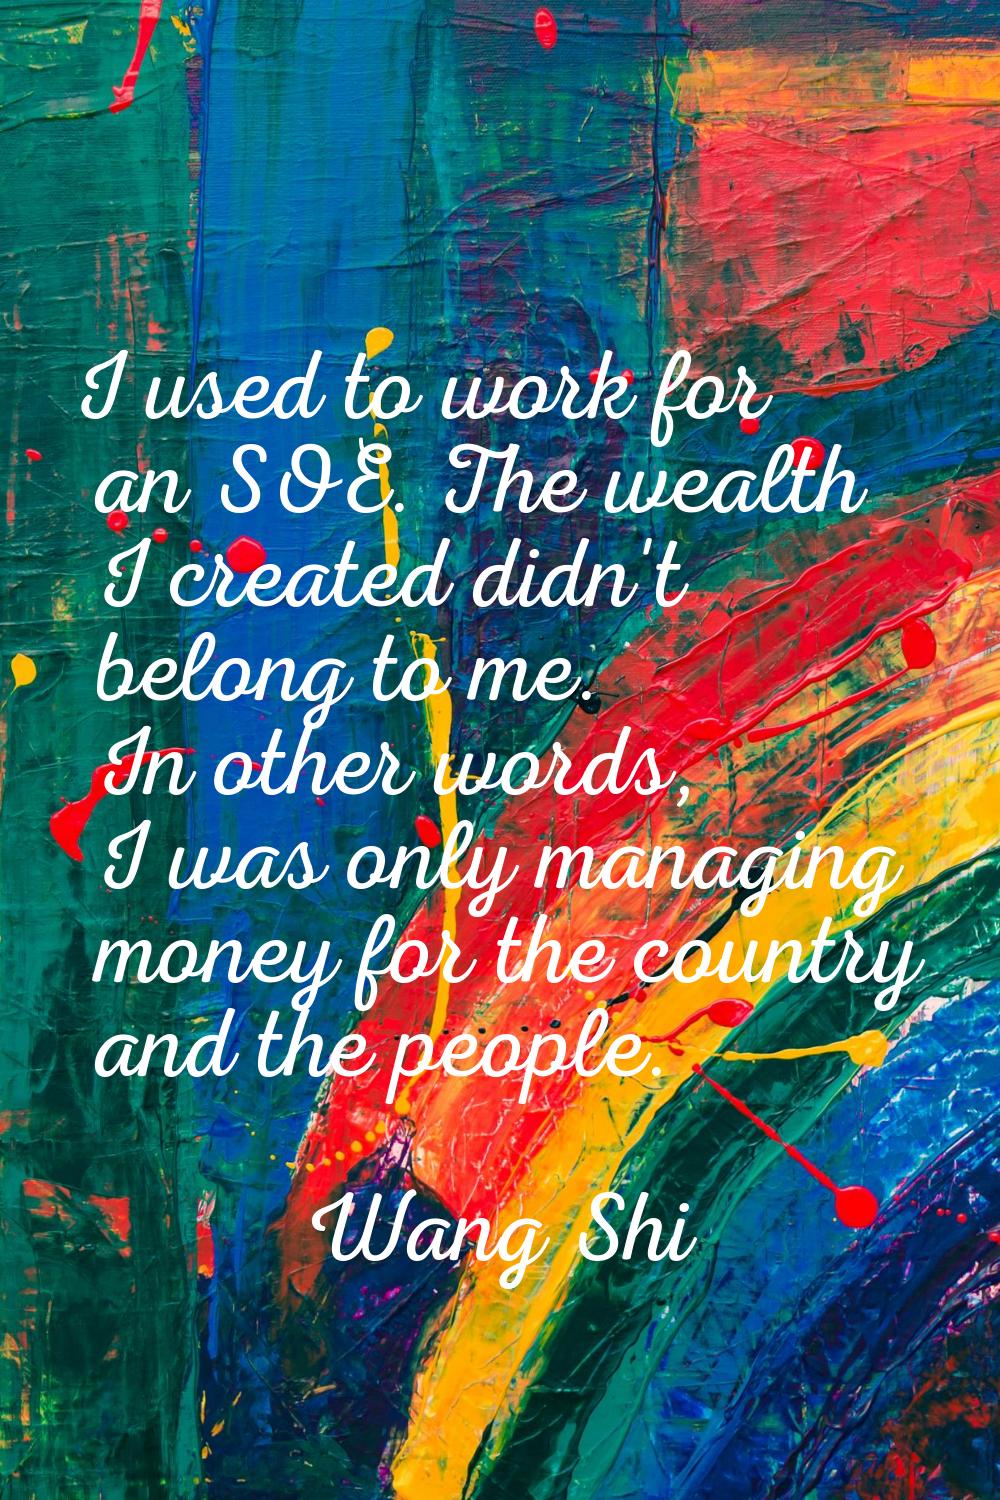 I used to work for an SOE. The wealth I created didn't belong to me. In other words, I was only man